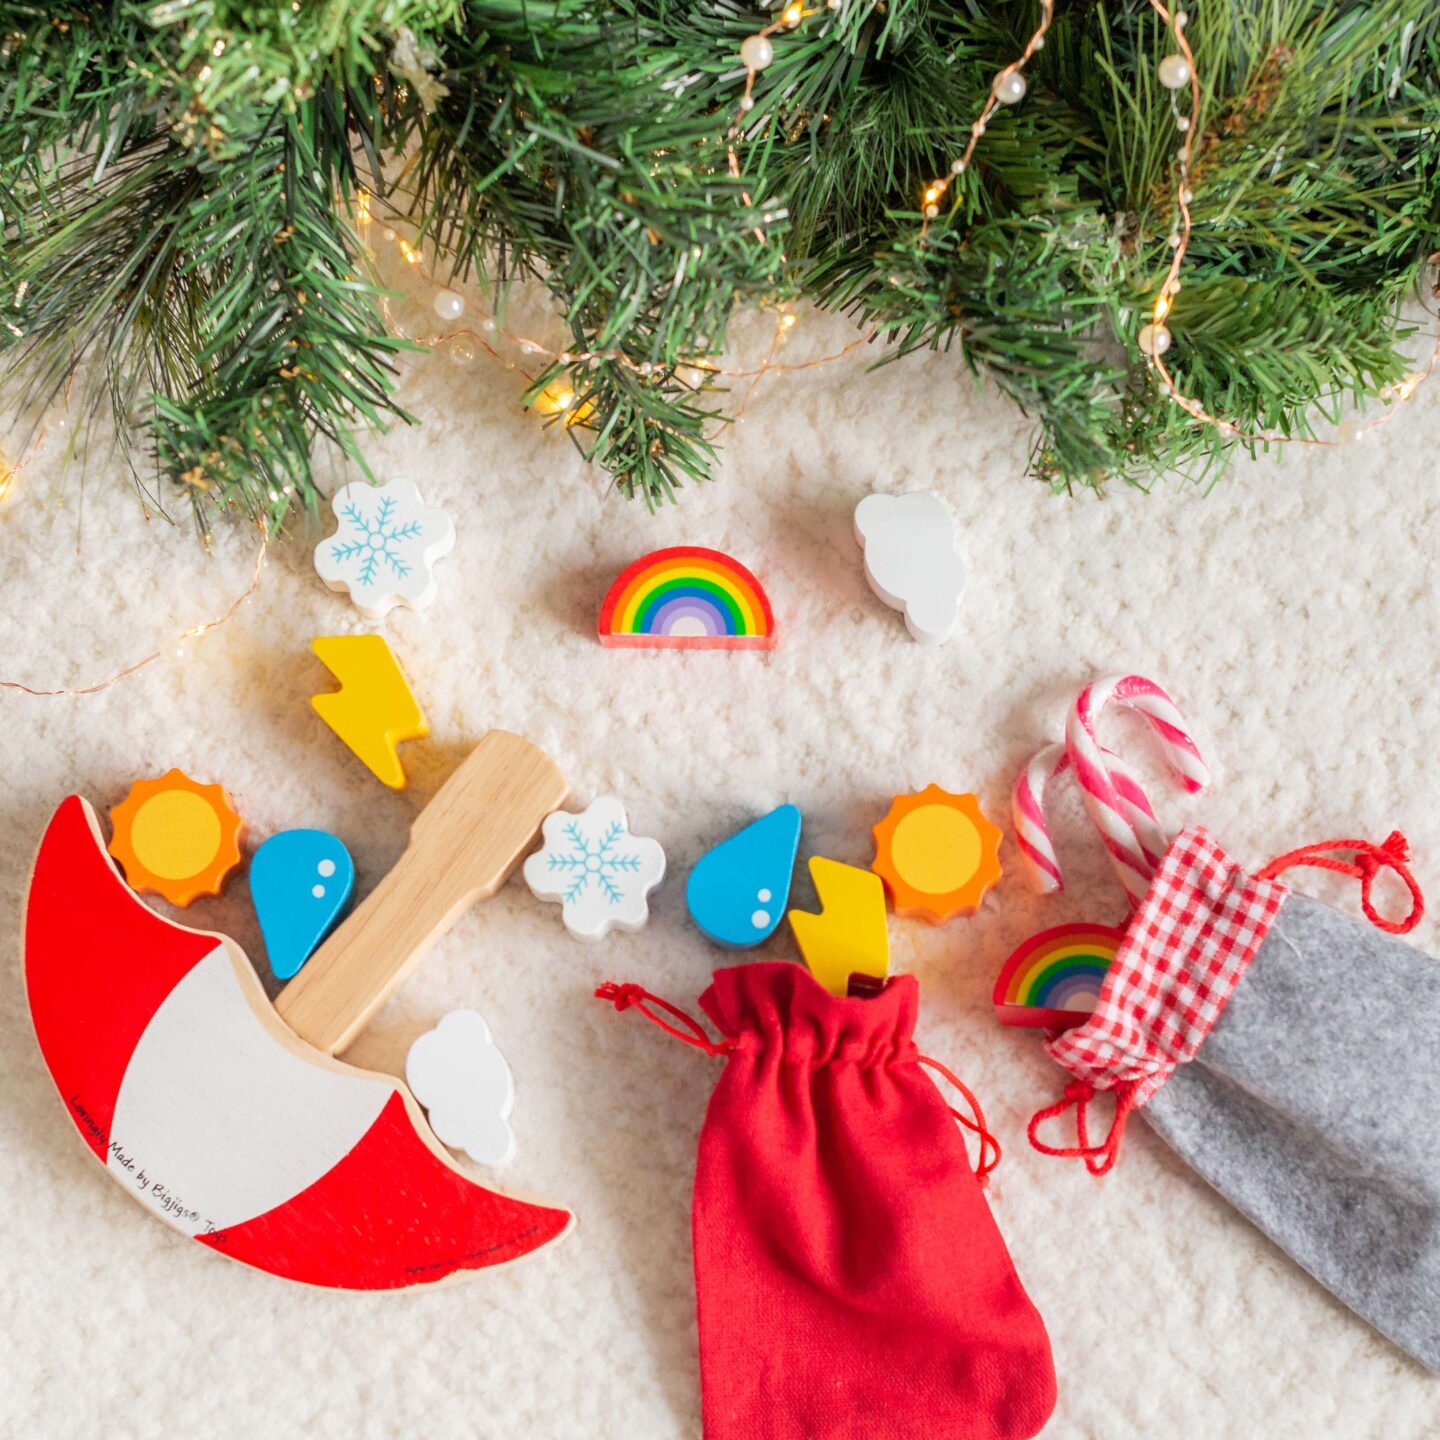 Small Christmas Gift Ideas for Kids